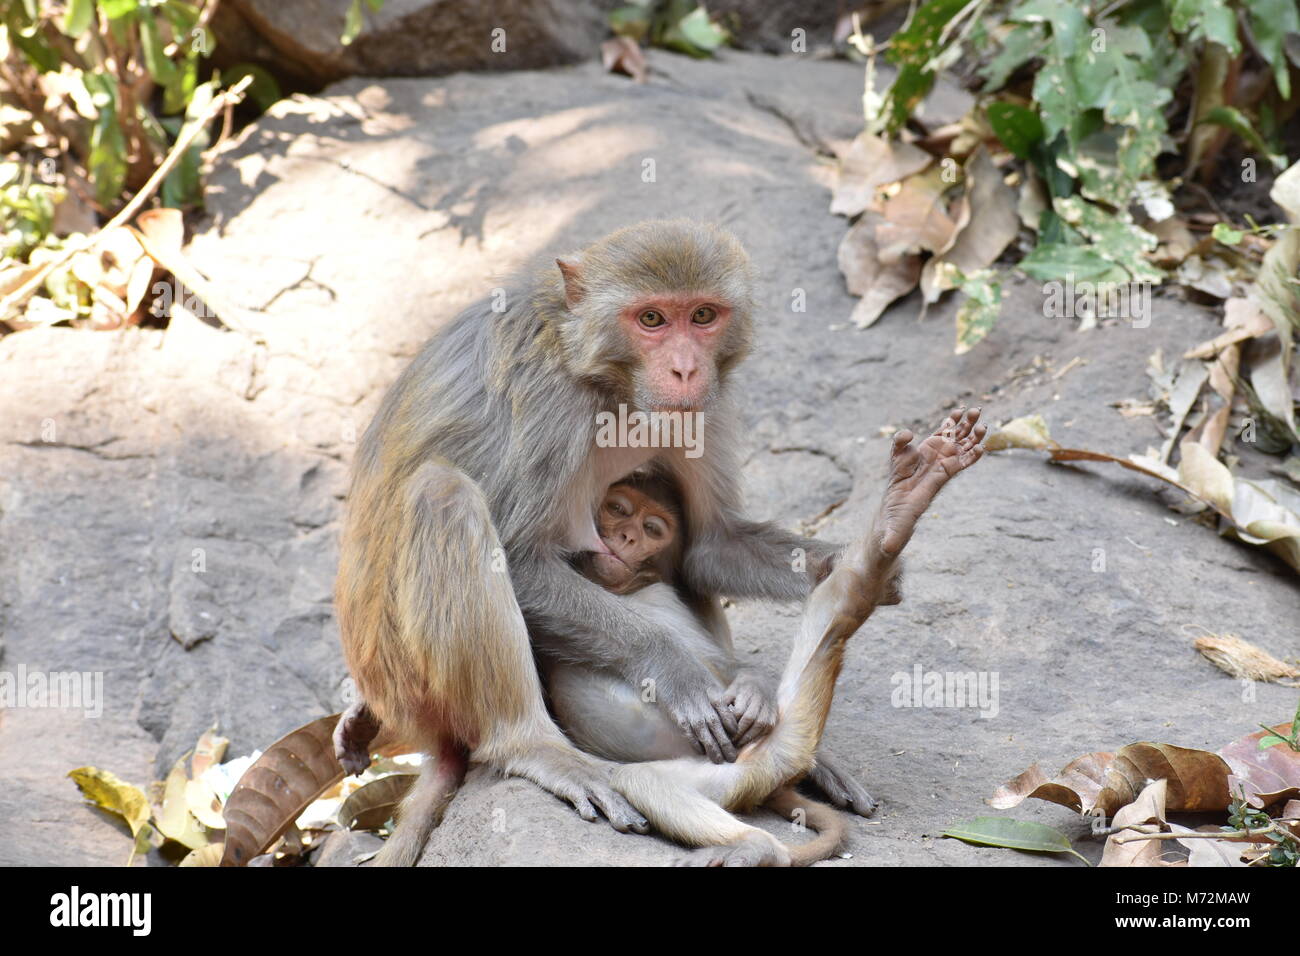 A awesome snap of monkey mother feed milk to her monkey kid in a big stone with care & love. Stock Photo